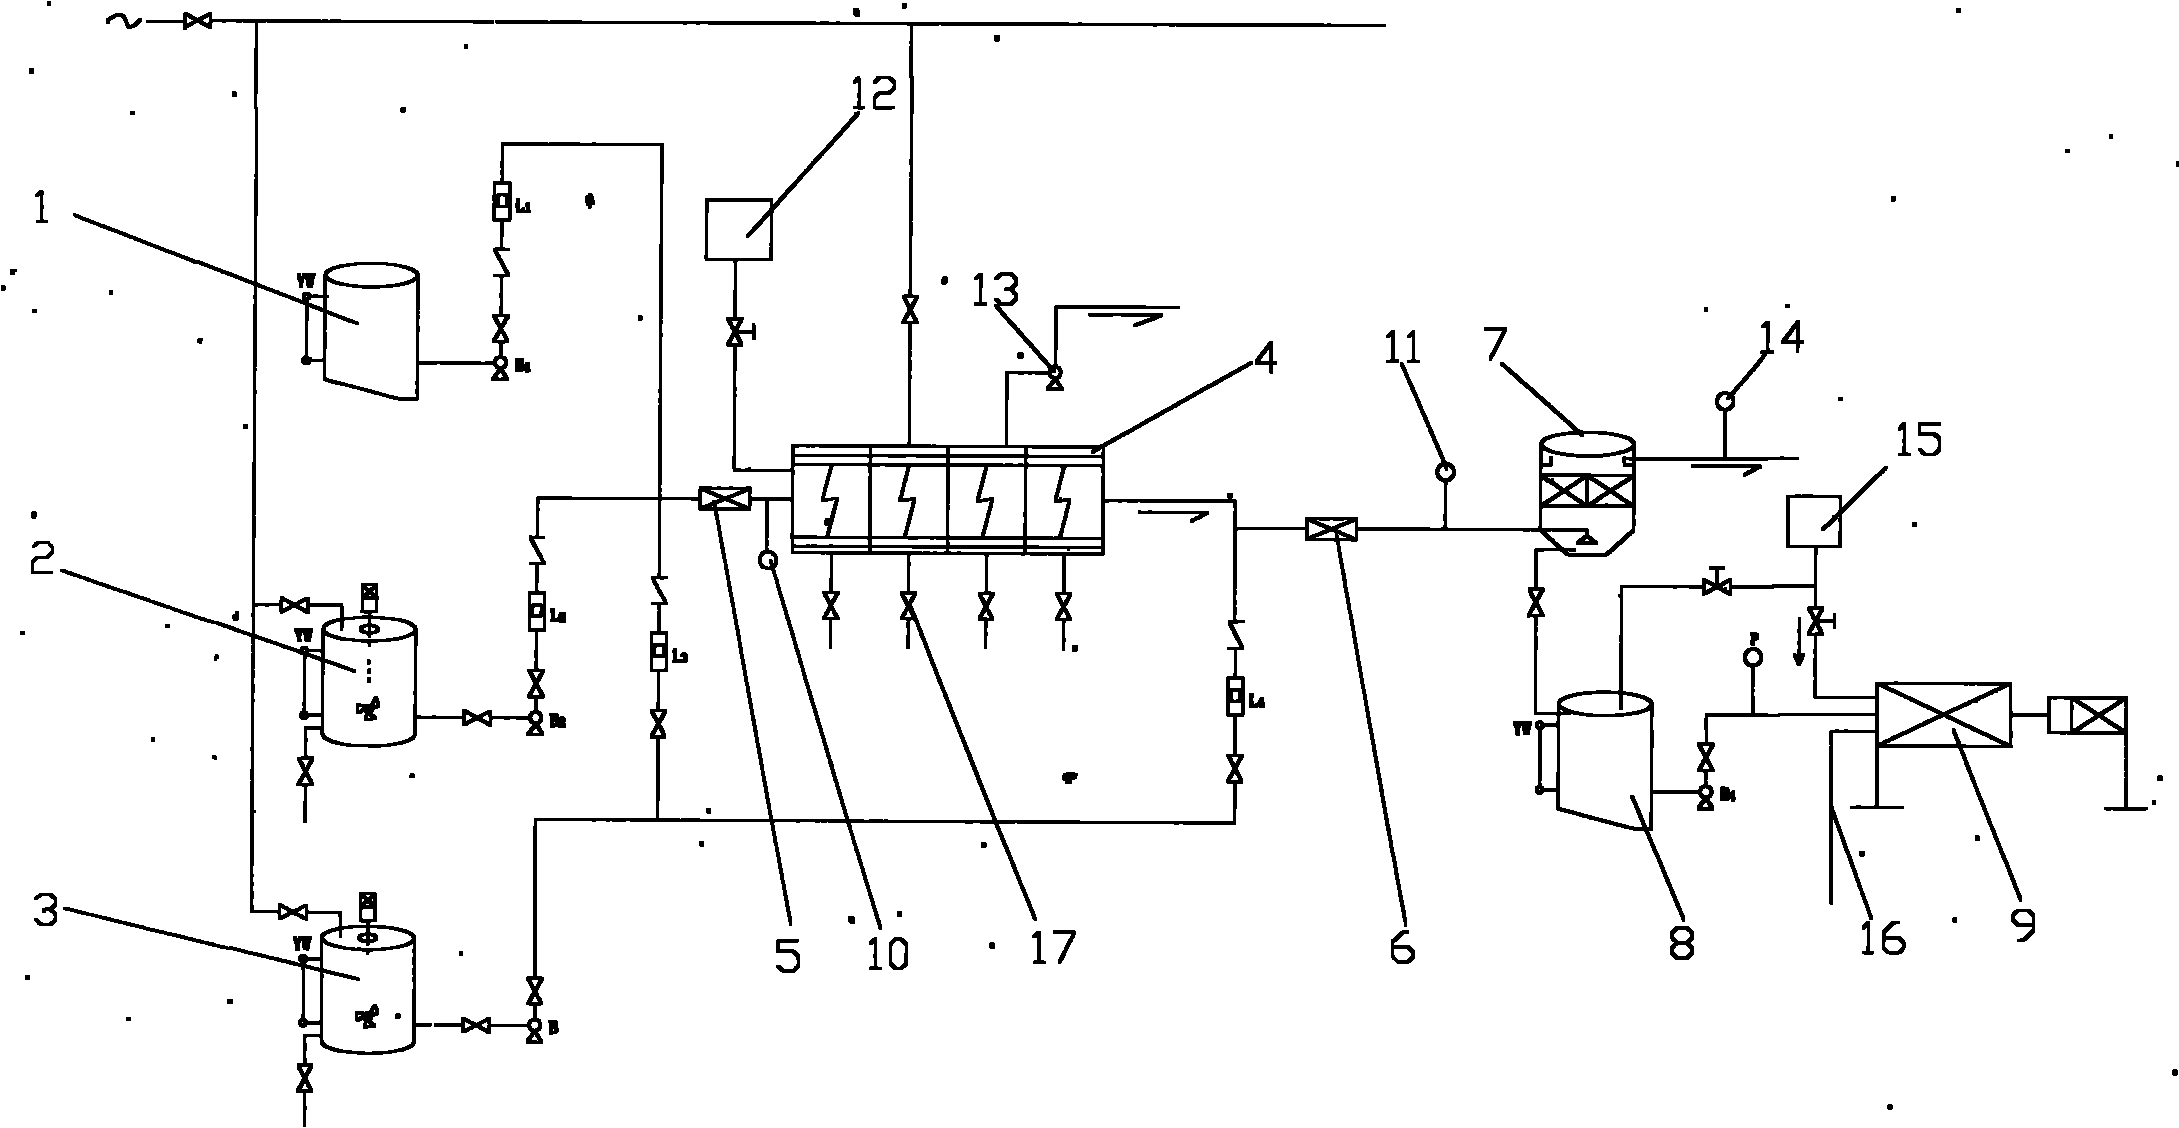 Wastewater electrolytic treatment system